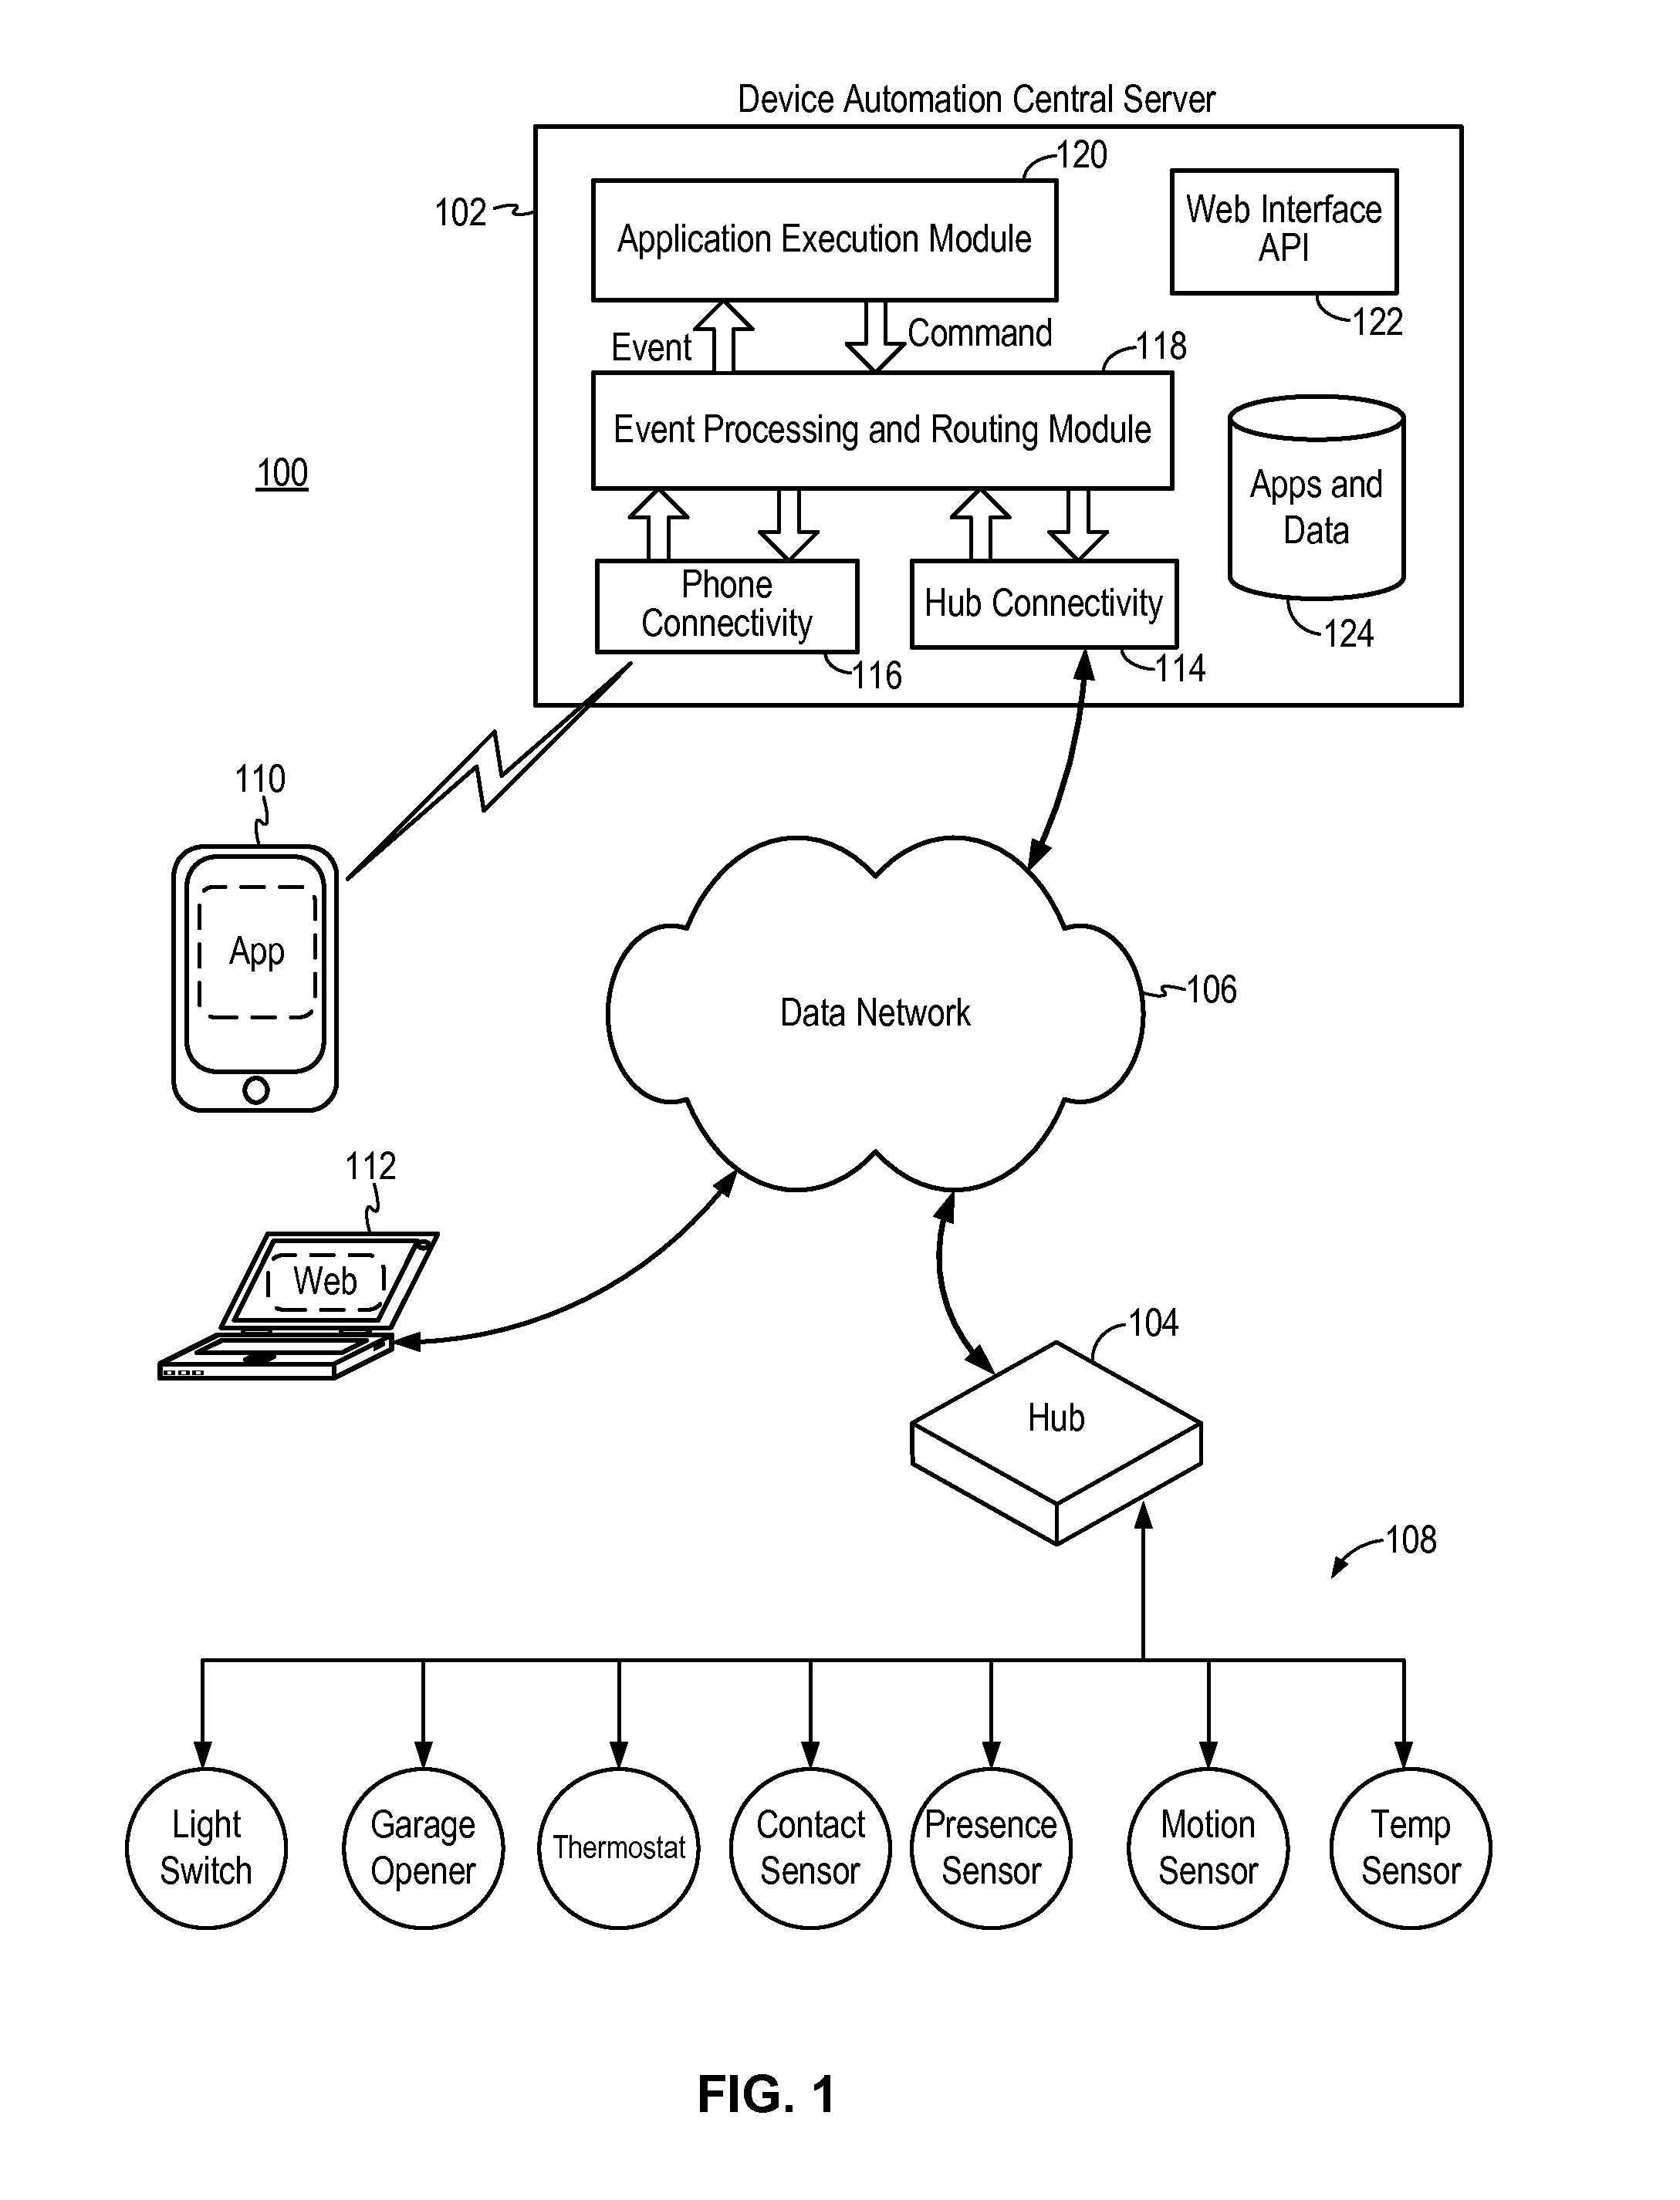 Distributed control scheme for remote control and monitoring of devices through a data network